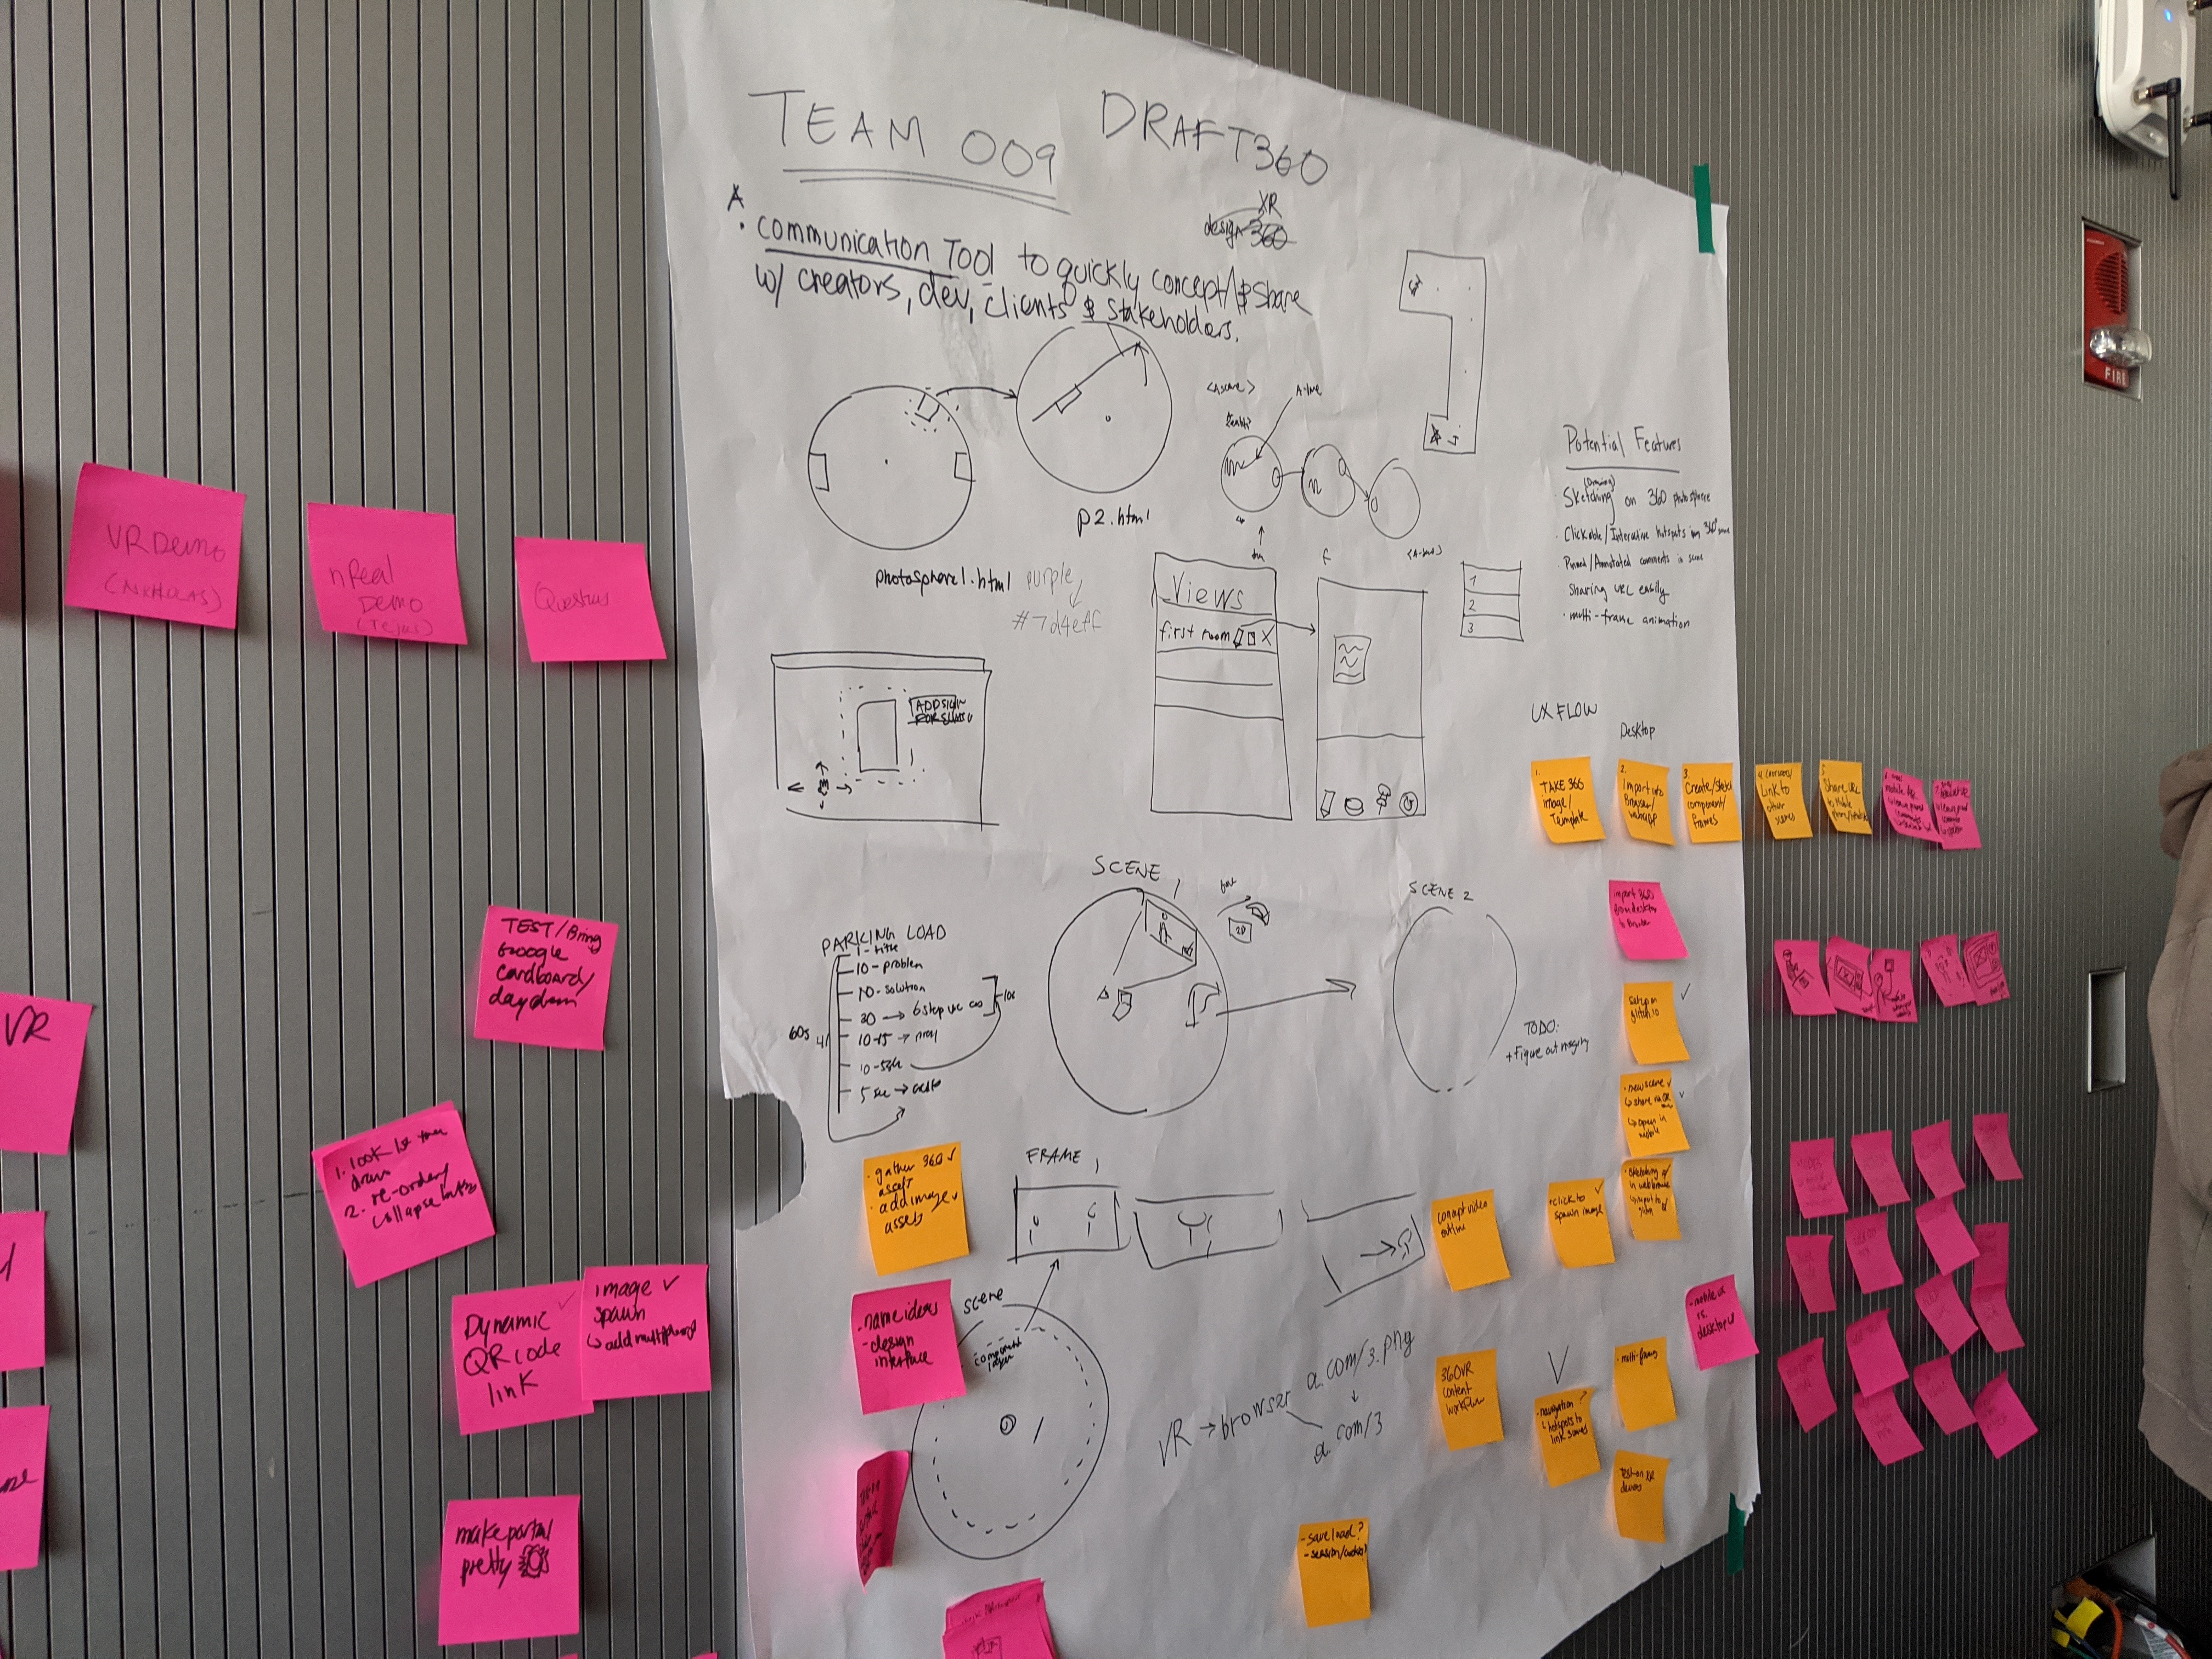 Day 3  Sprawling visualizations, ideation and problem solving